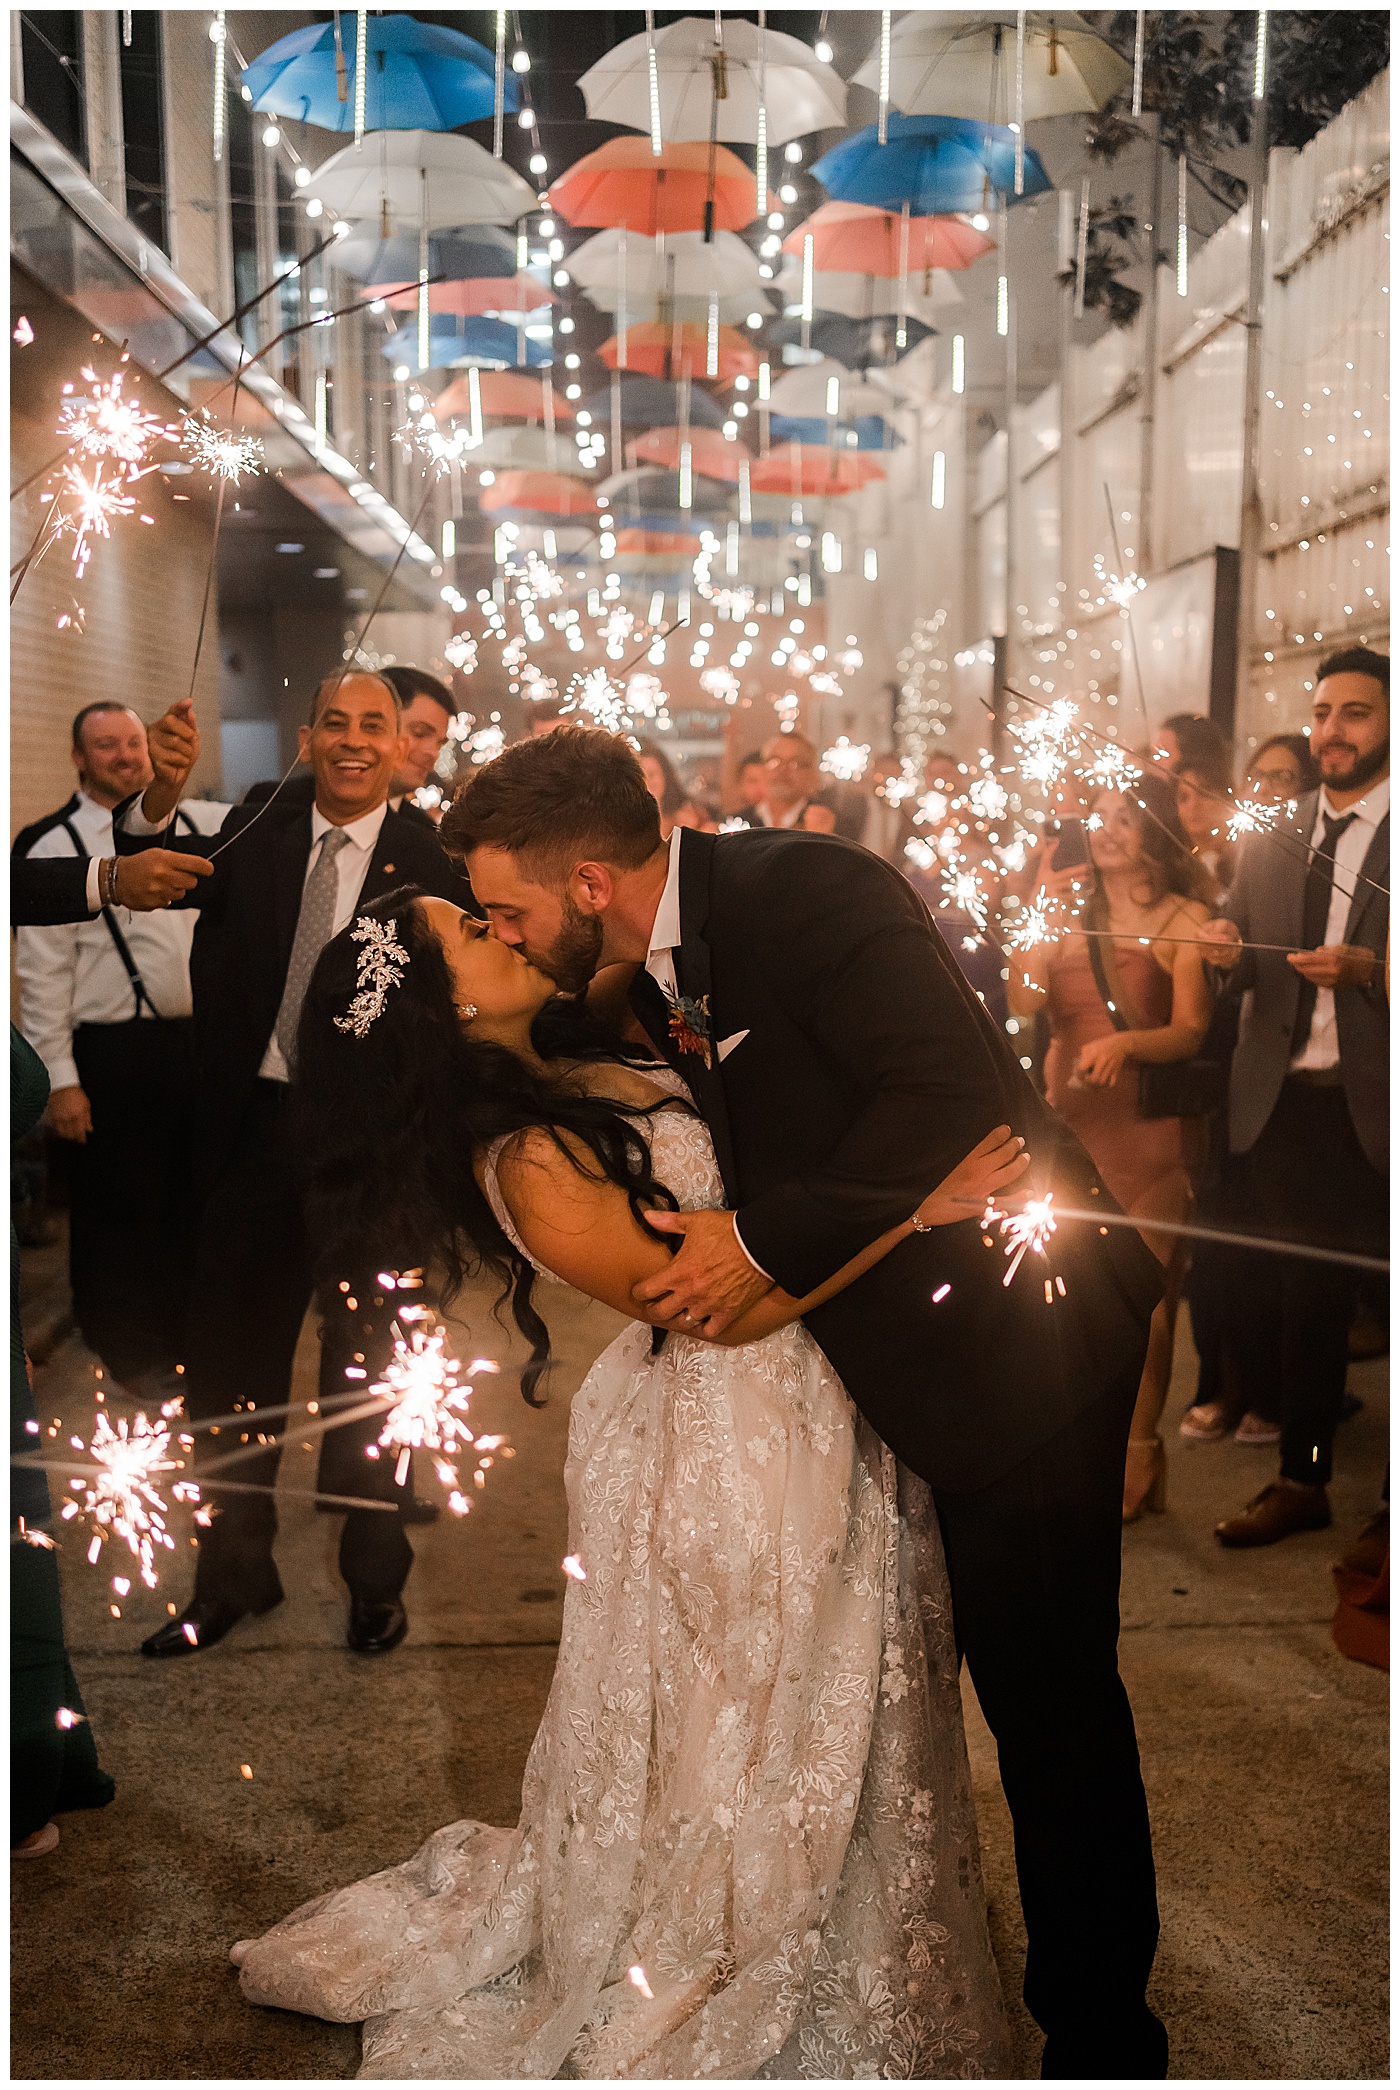 Chattanooga Downtown Bride and Groom Sparkler Exit